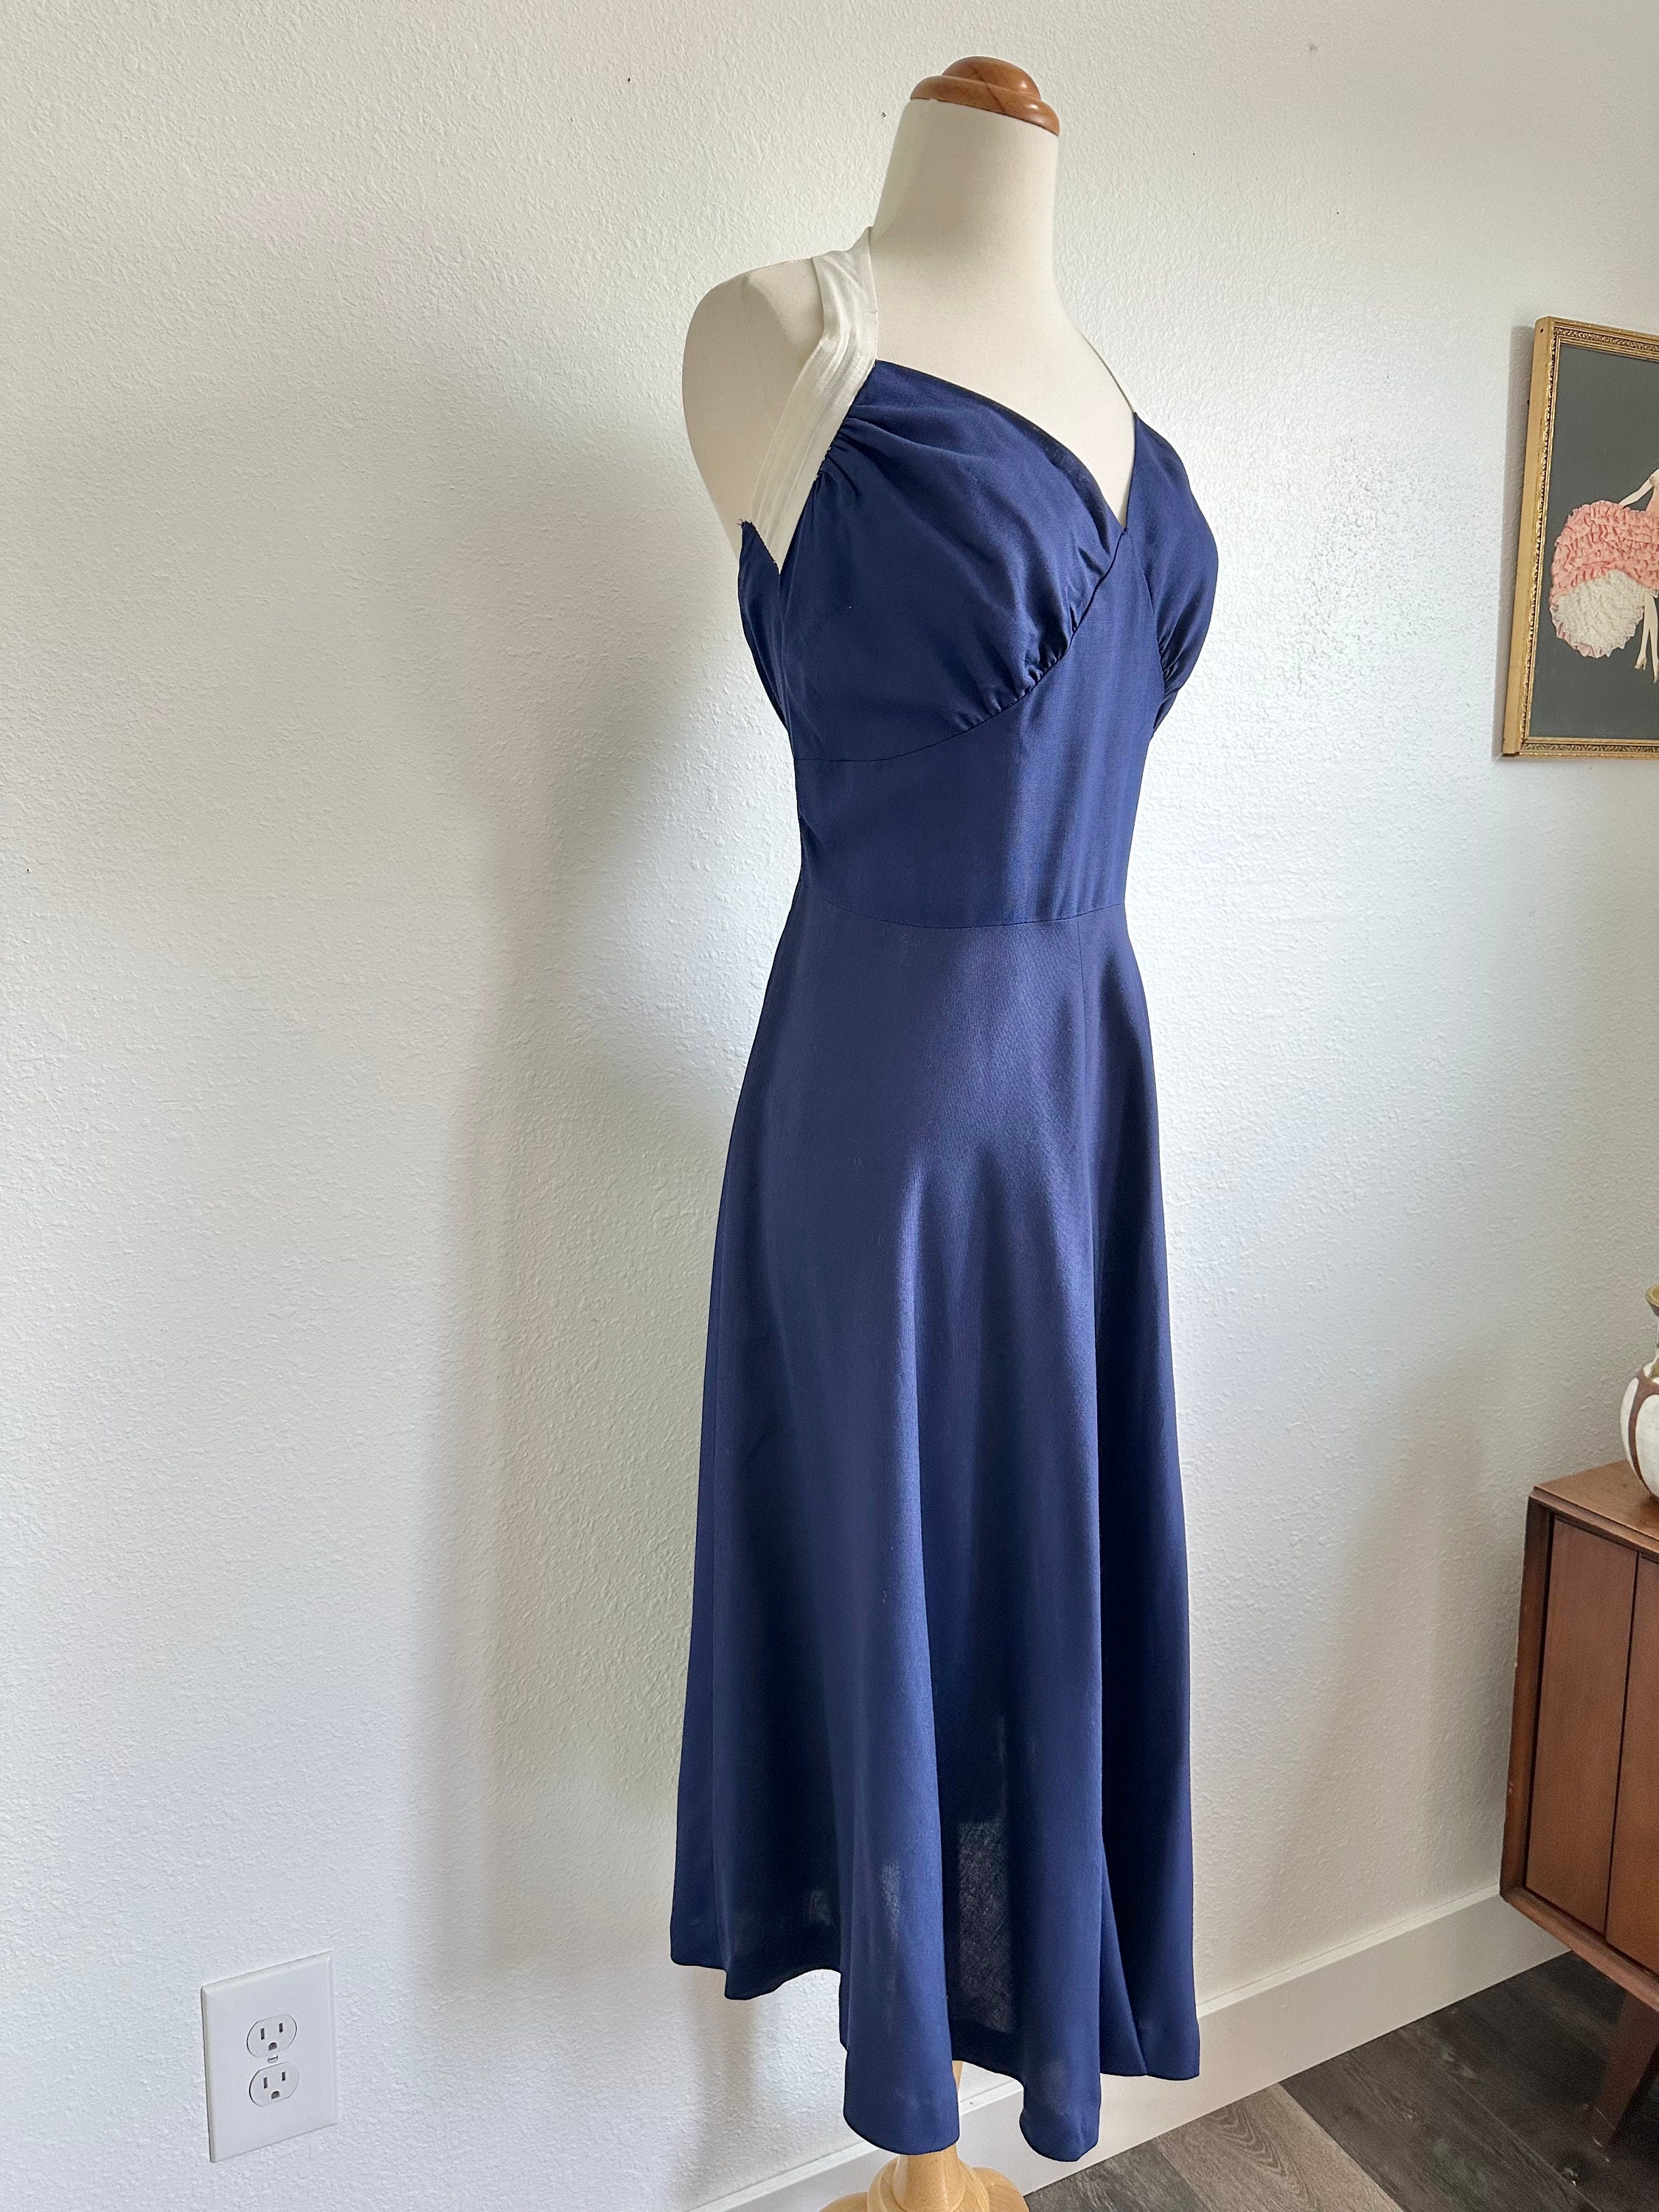 1950s 1960s Navy Blue and White Linen Halter Dress Fit and Flare ...